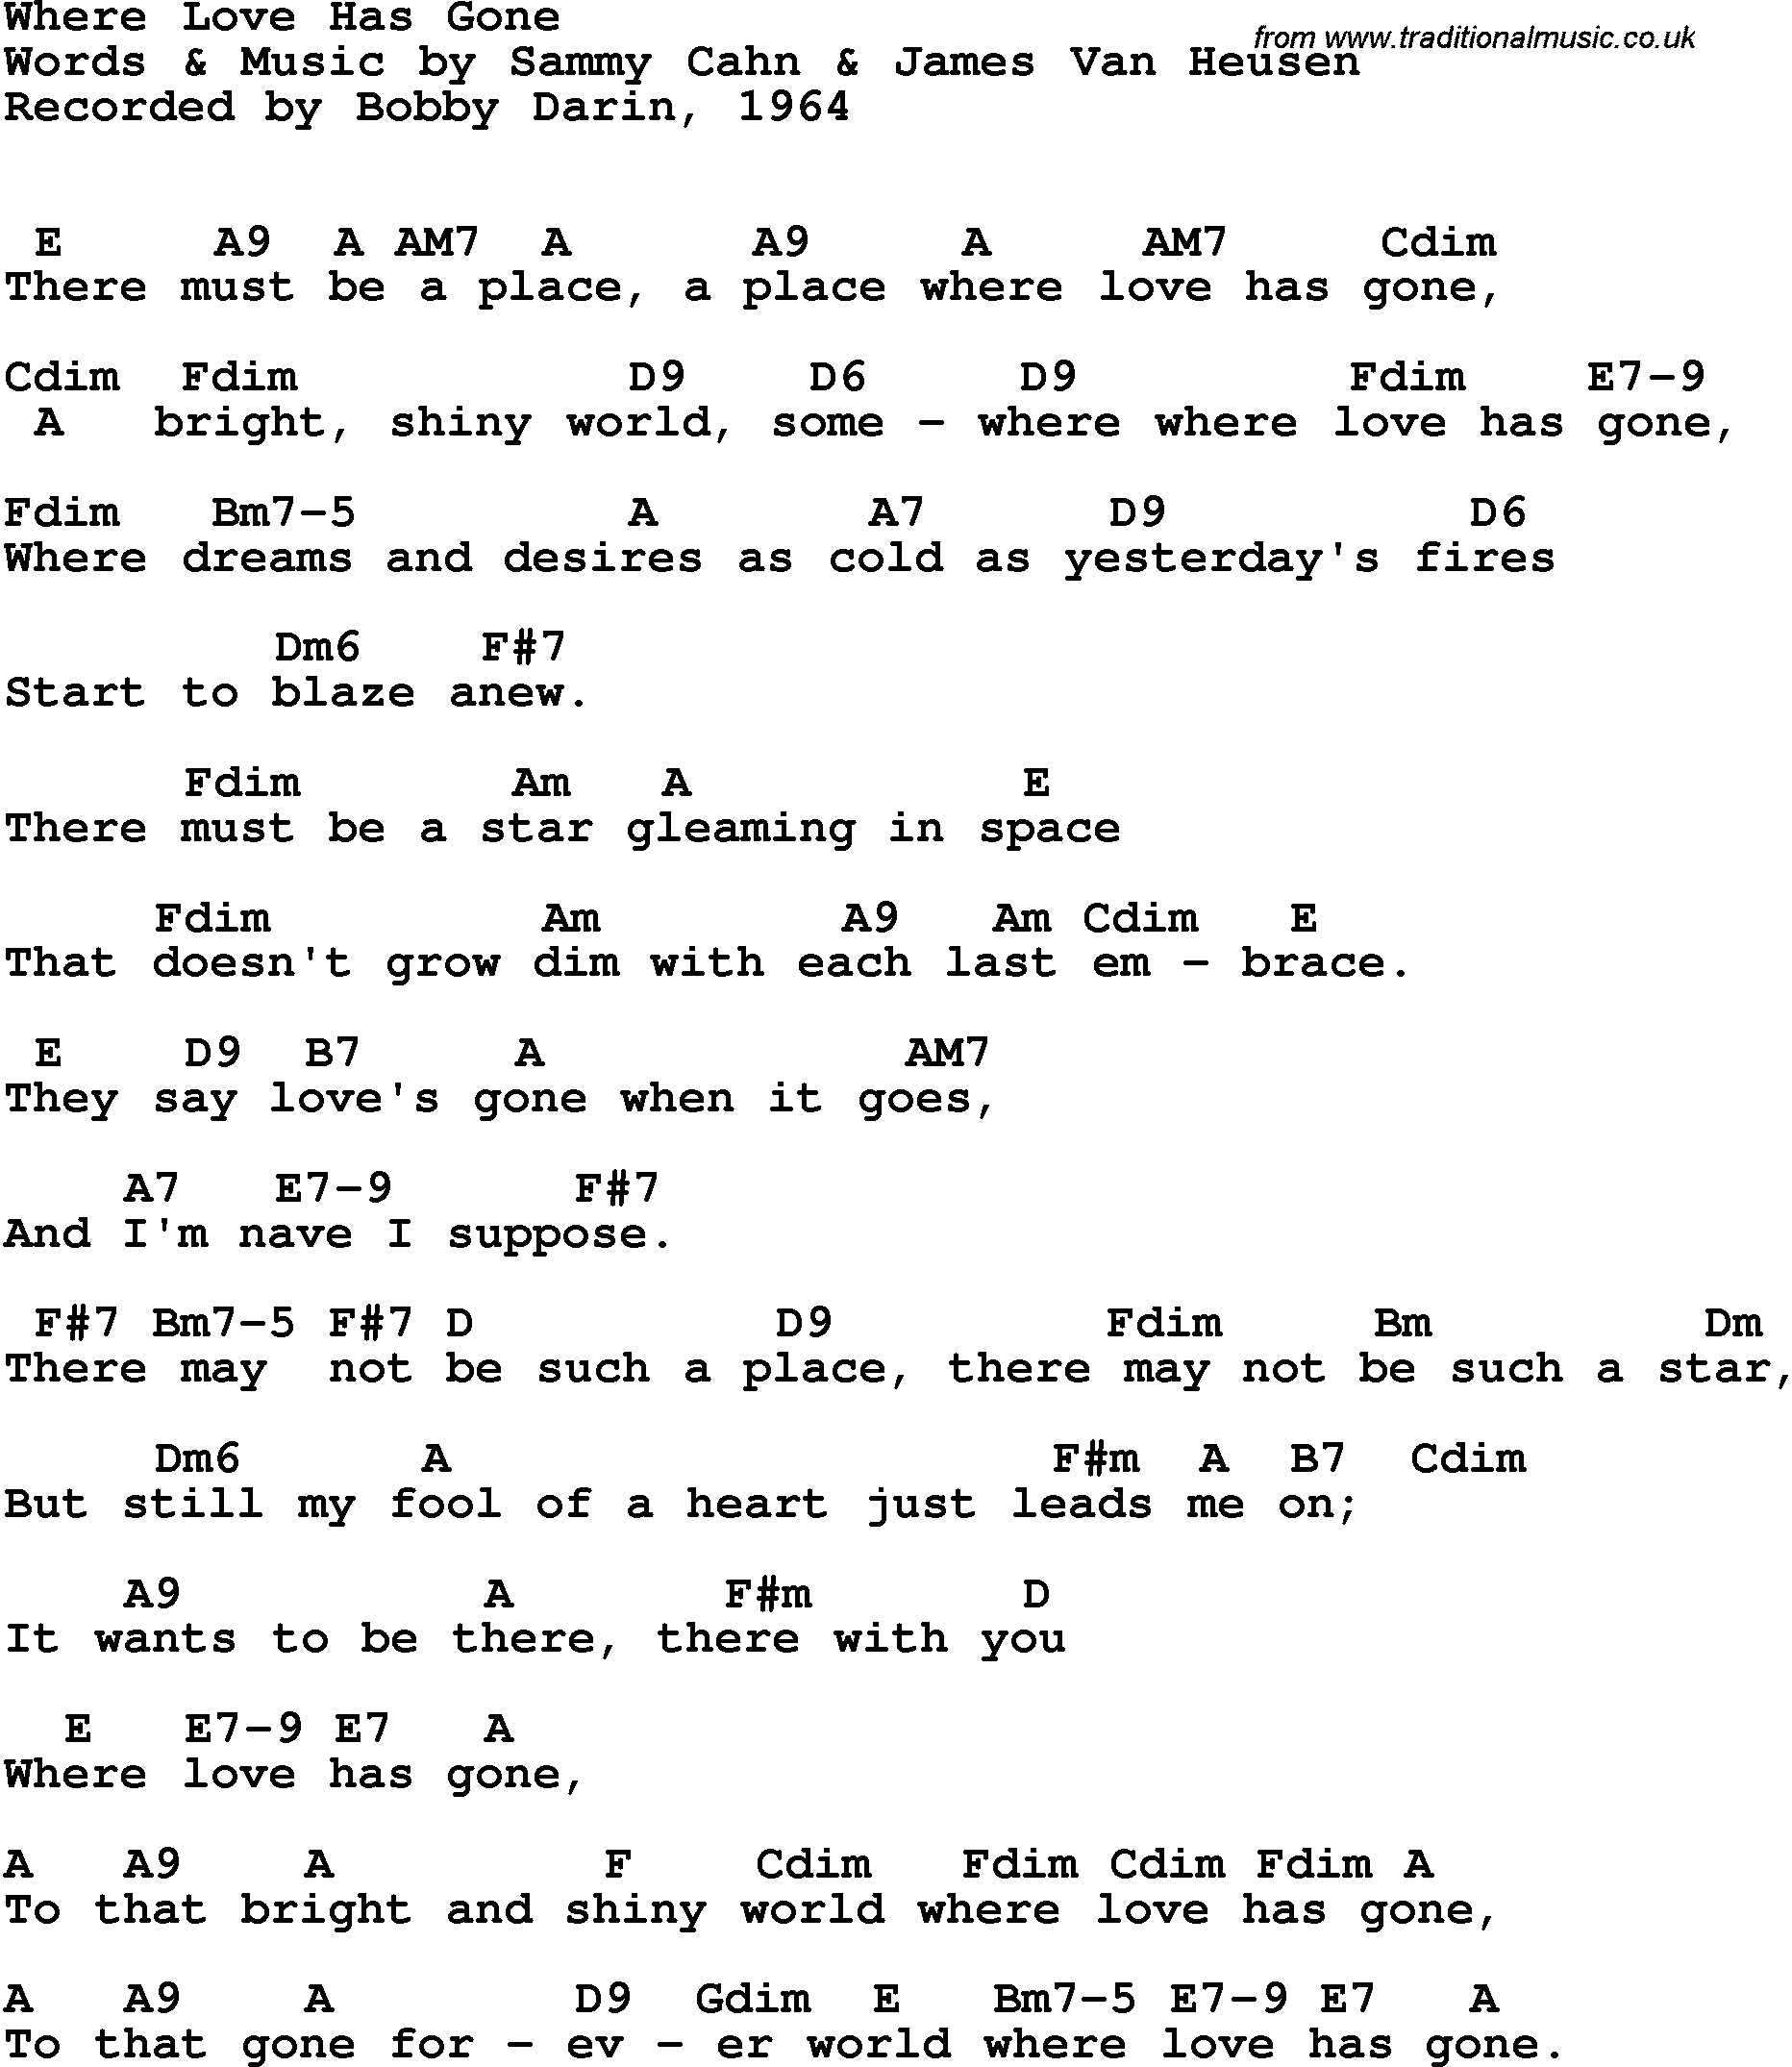 Song Lyrics with guitar chords for Where Love Has Gone - Bobby Darin, 1964